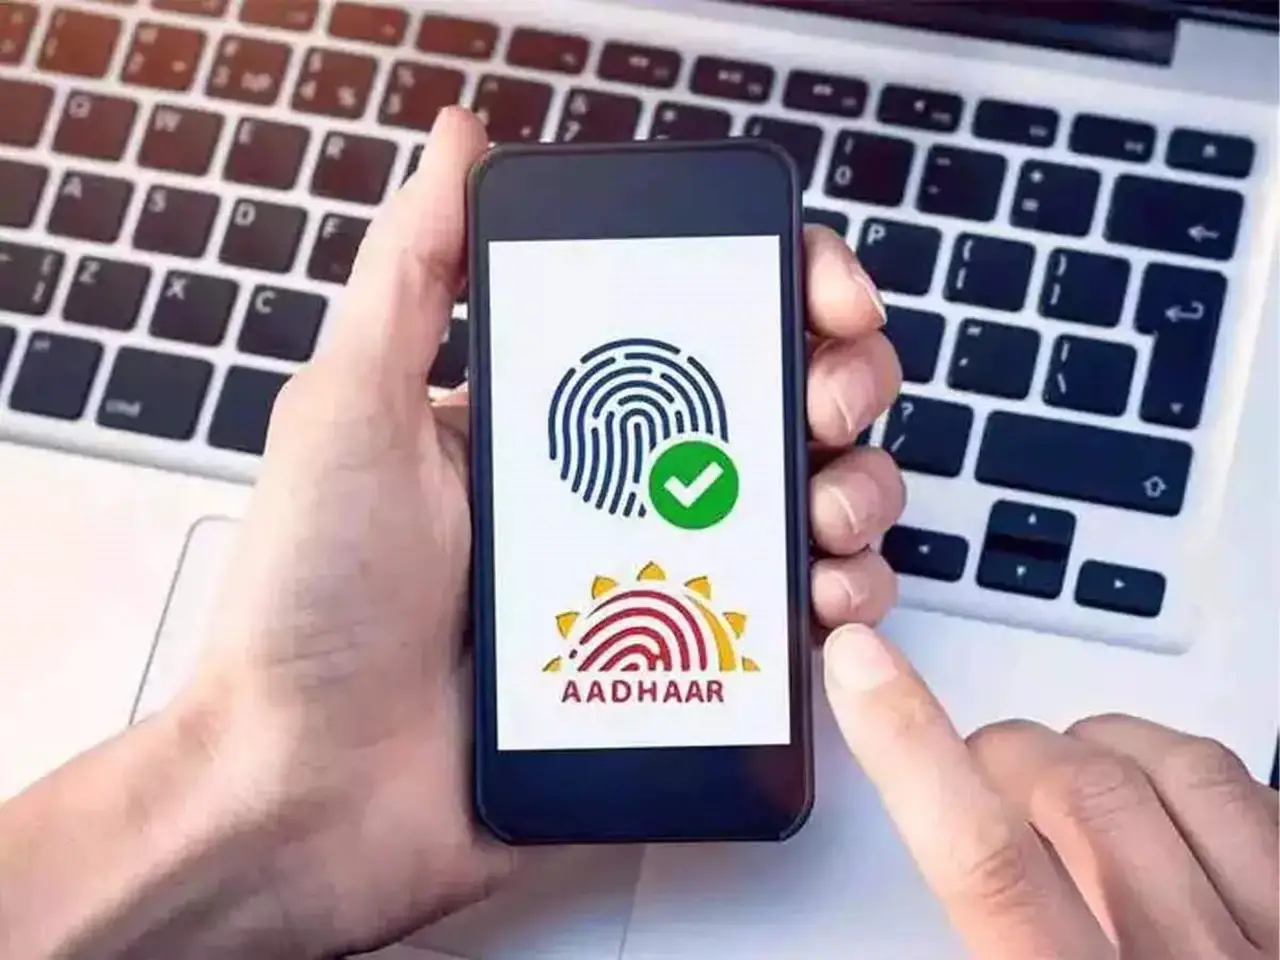 Keep Your Aadhaar Card Safe by Following These 7 Safety Measures Suggested by UIDAI